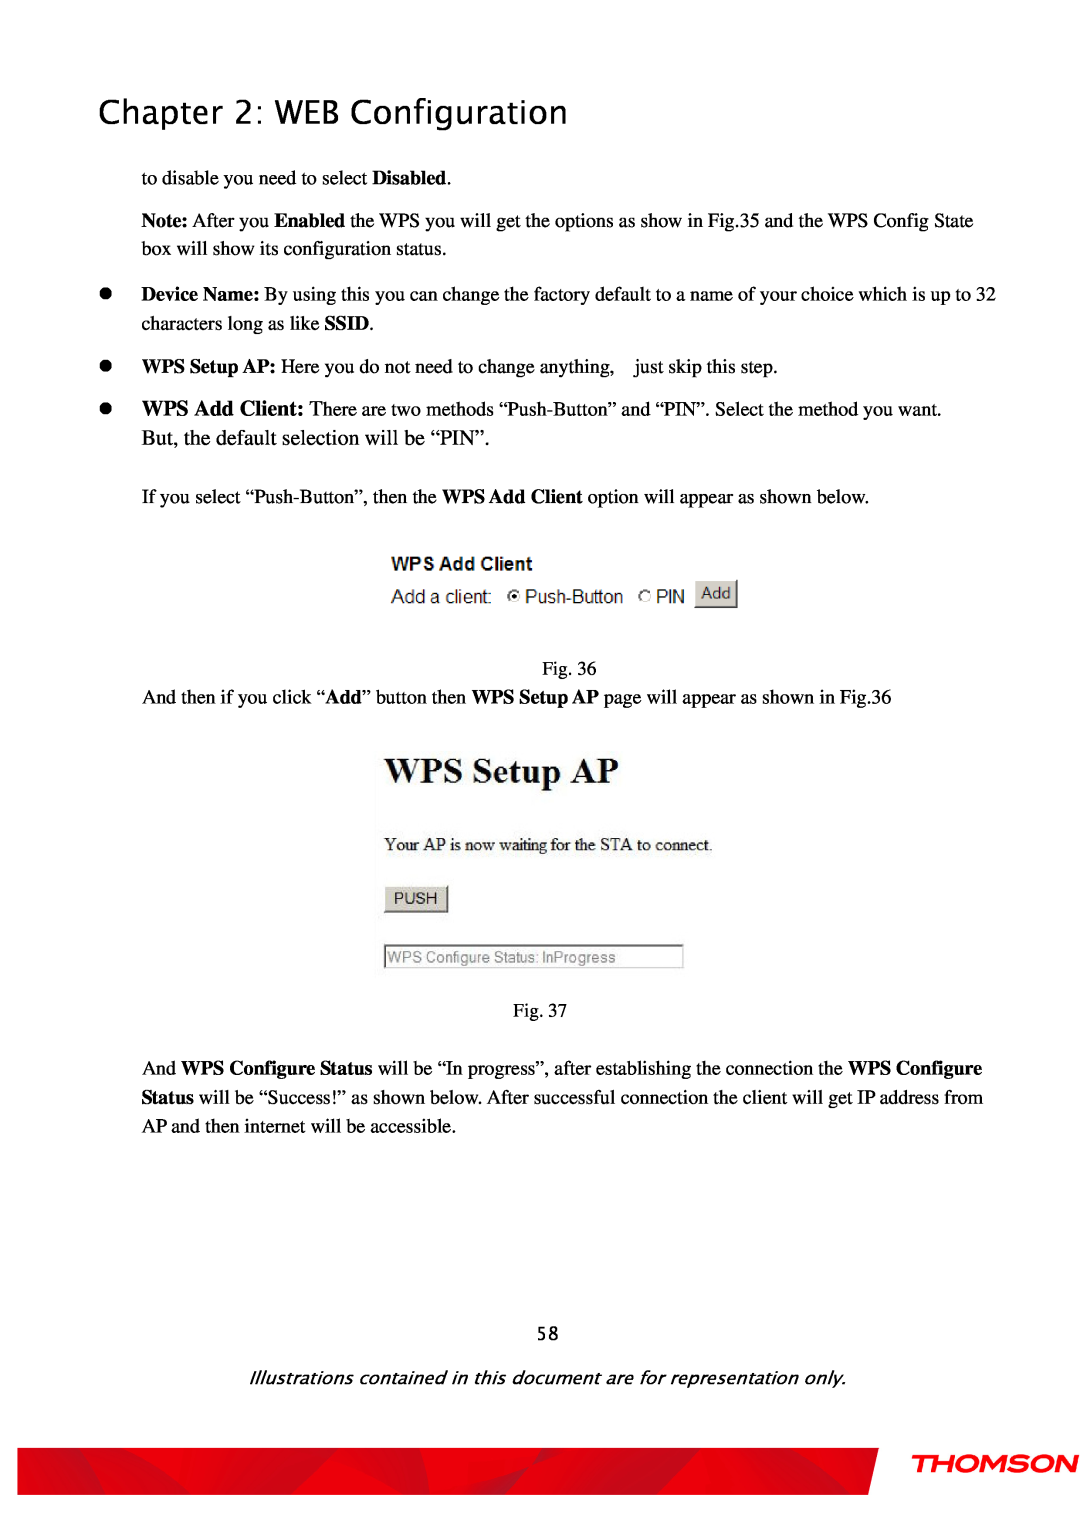 Gateway TWG870 user manual WEB Configuration, But, the default selection will be “PIN” 